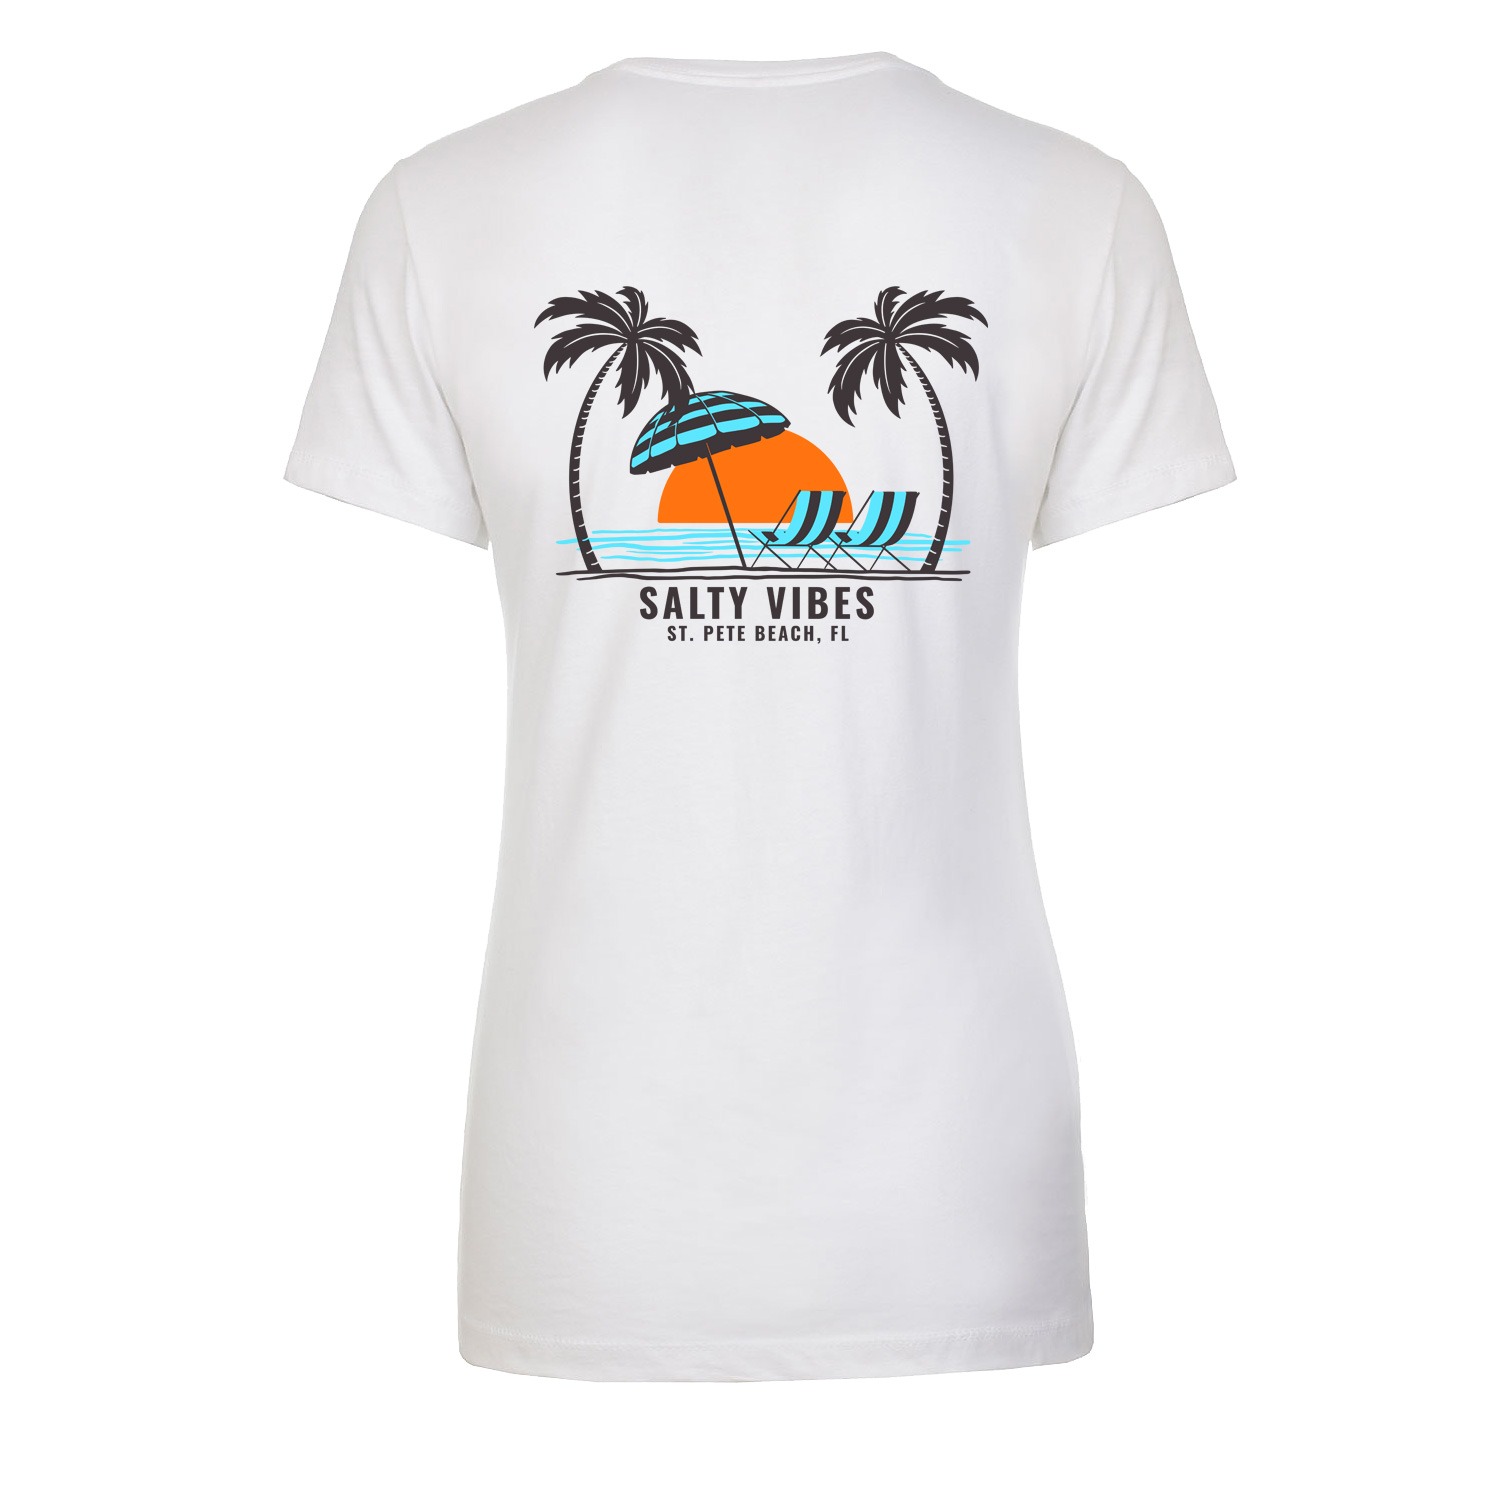 Salty Vibes Beach Sunset Women's Fitted T-Shirt - White, M